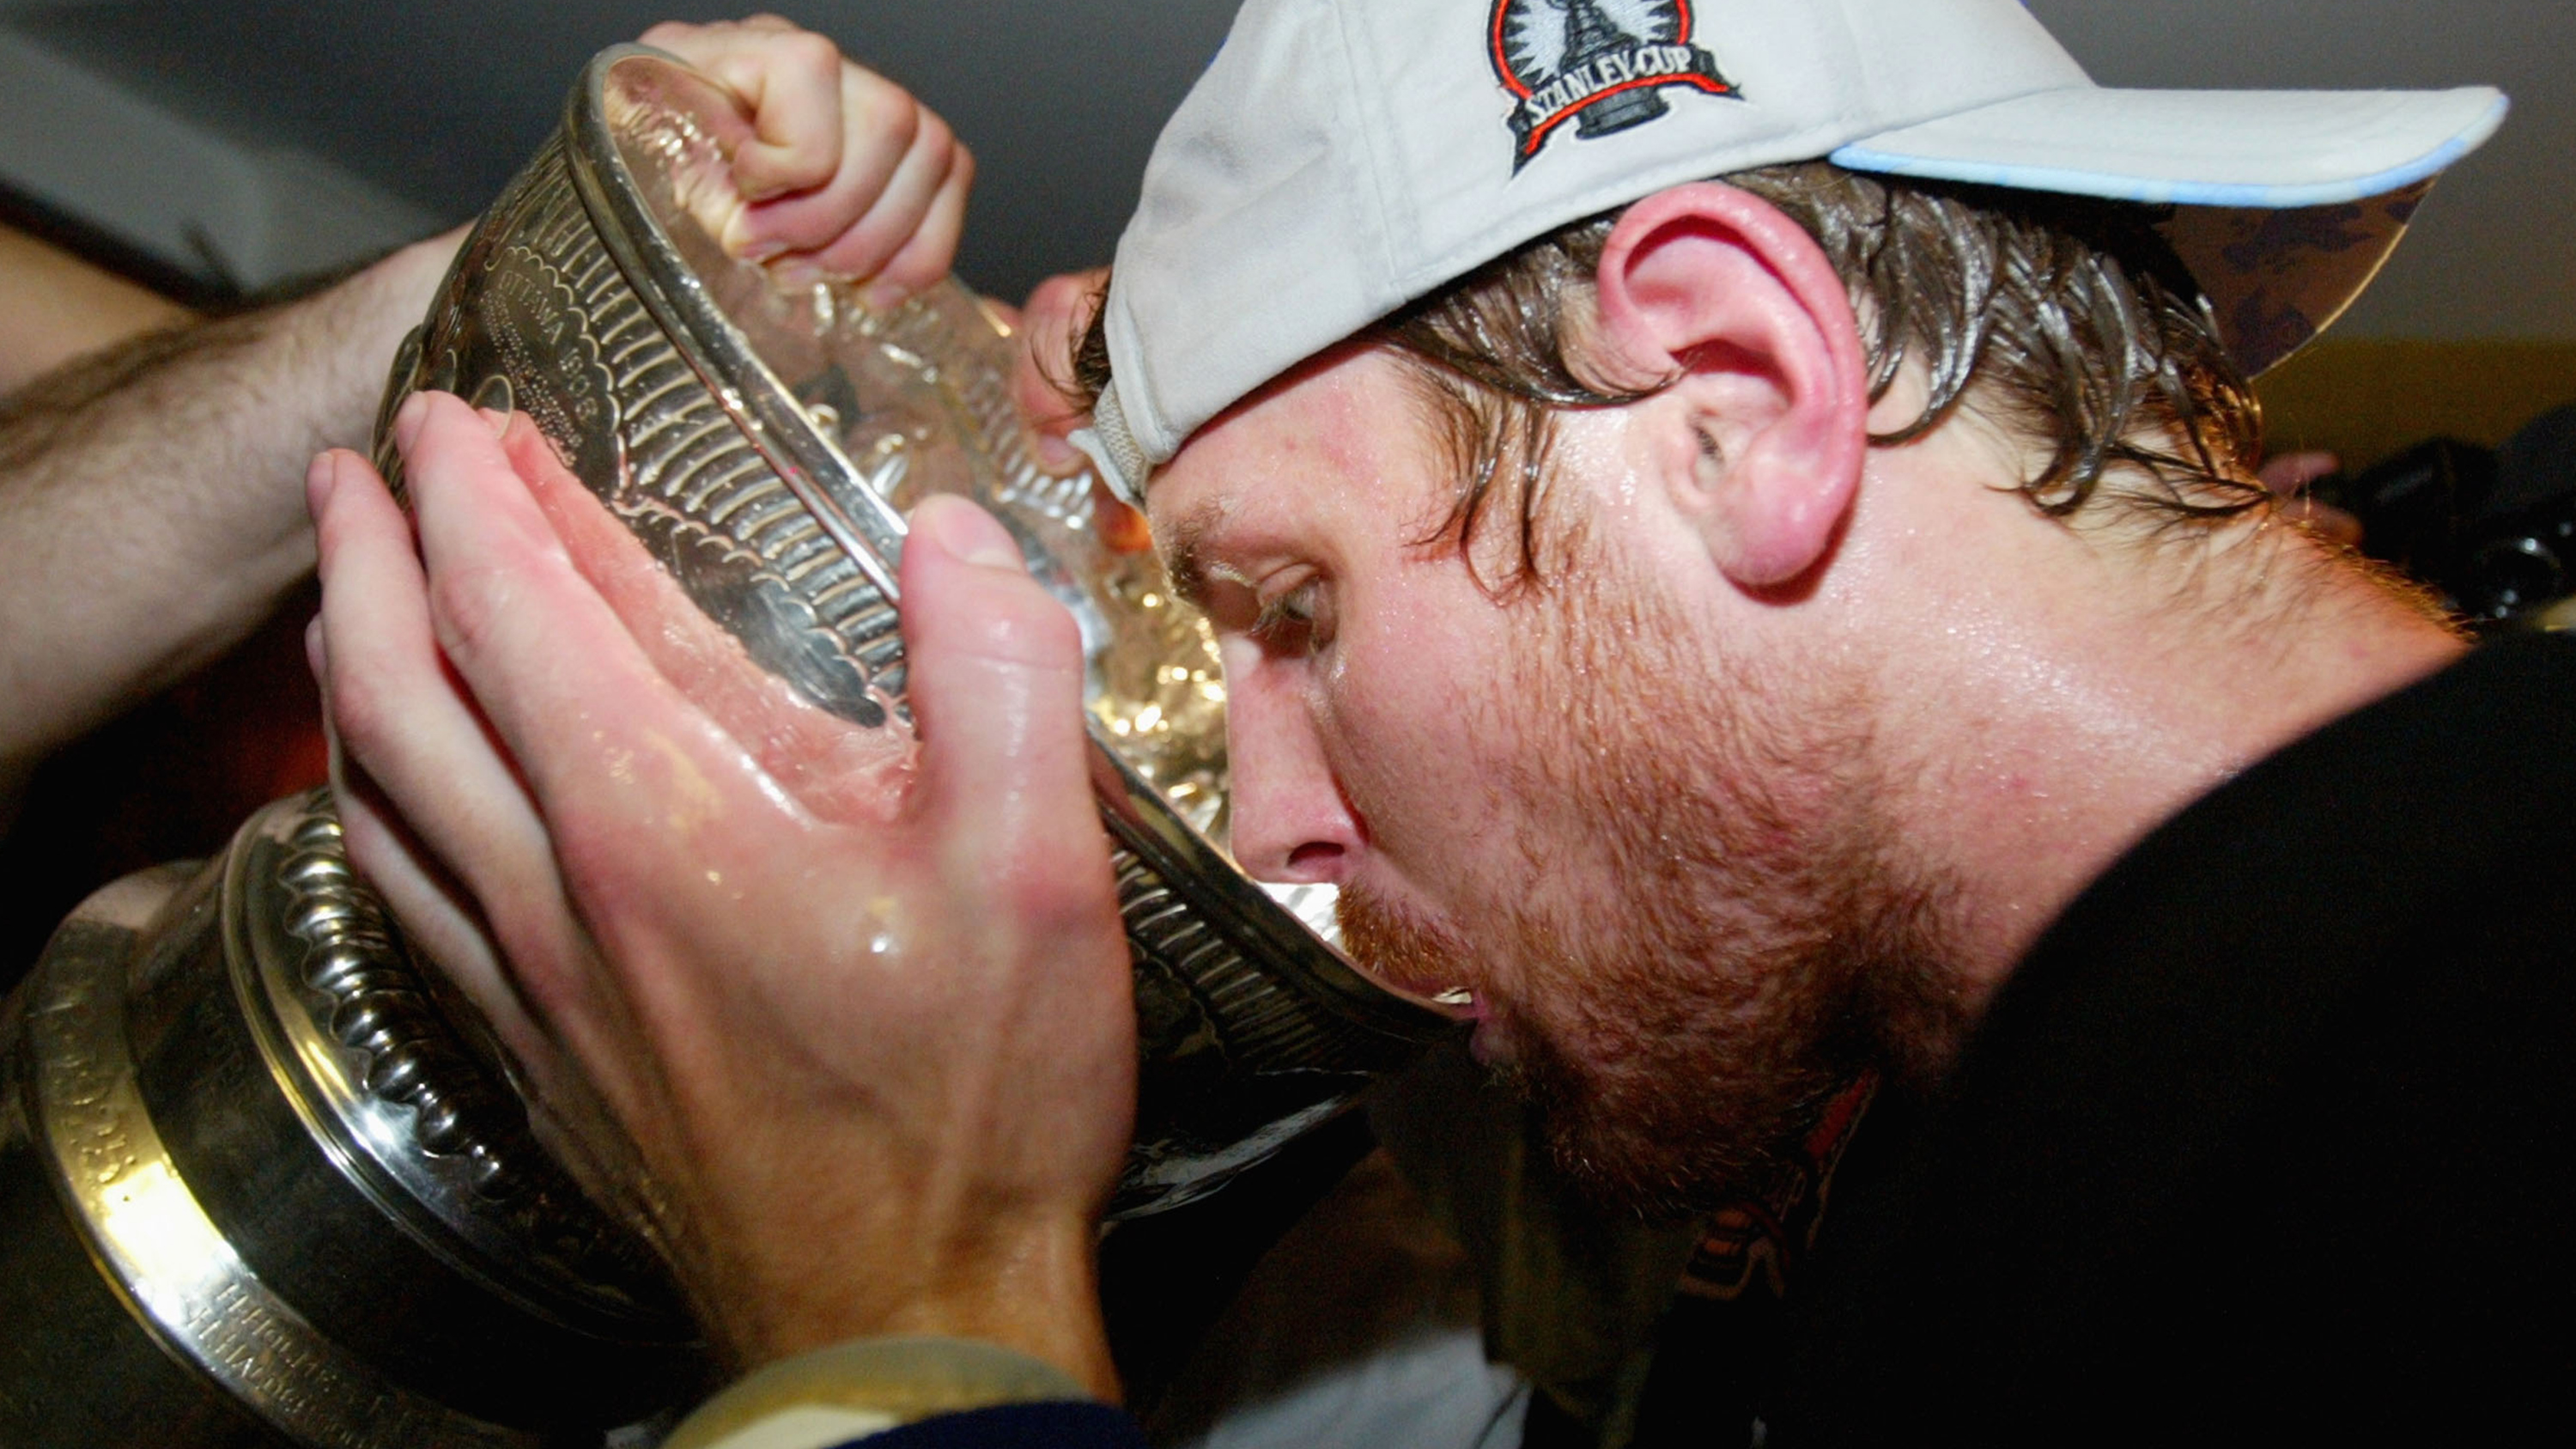 https://brobible.com/wp-content/uploads/2023/05/brian-richards-drinking-from-stanley-cup.jpg